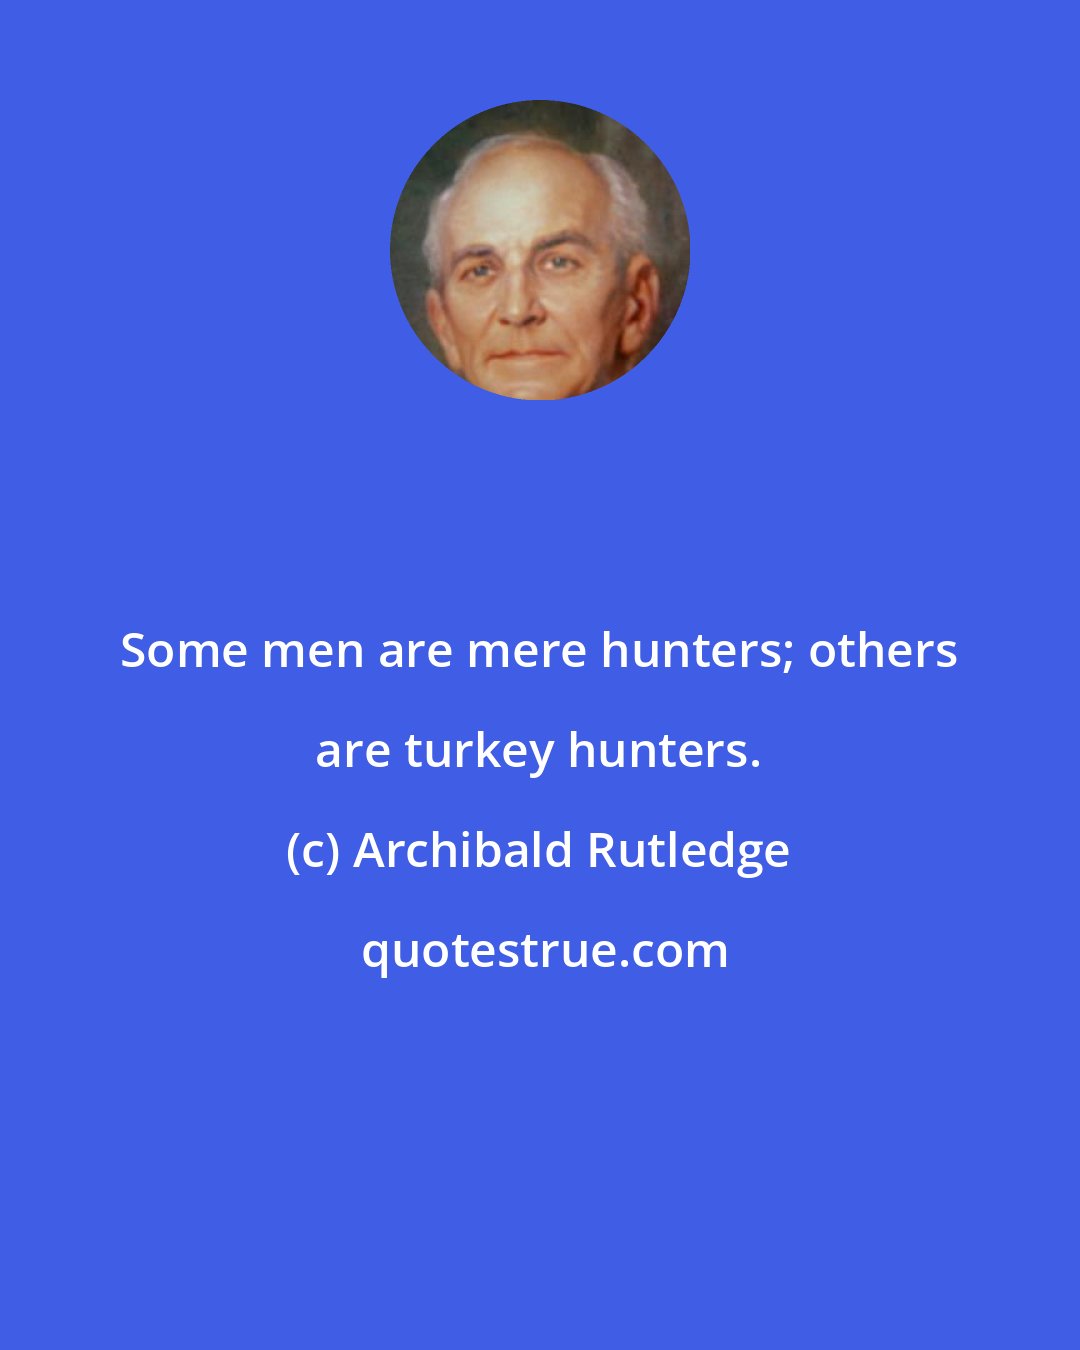 Archibald Rutledge: Some men are mere hunters; others are turkey hunters.